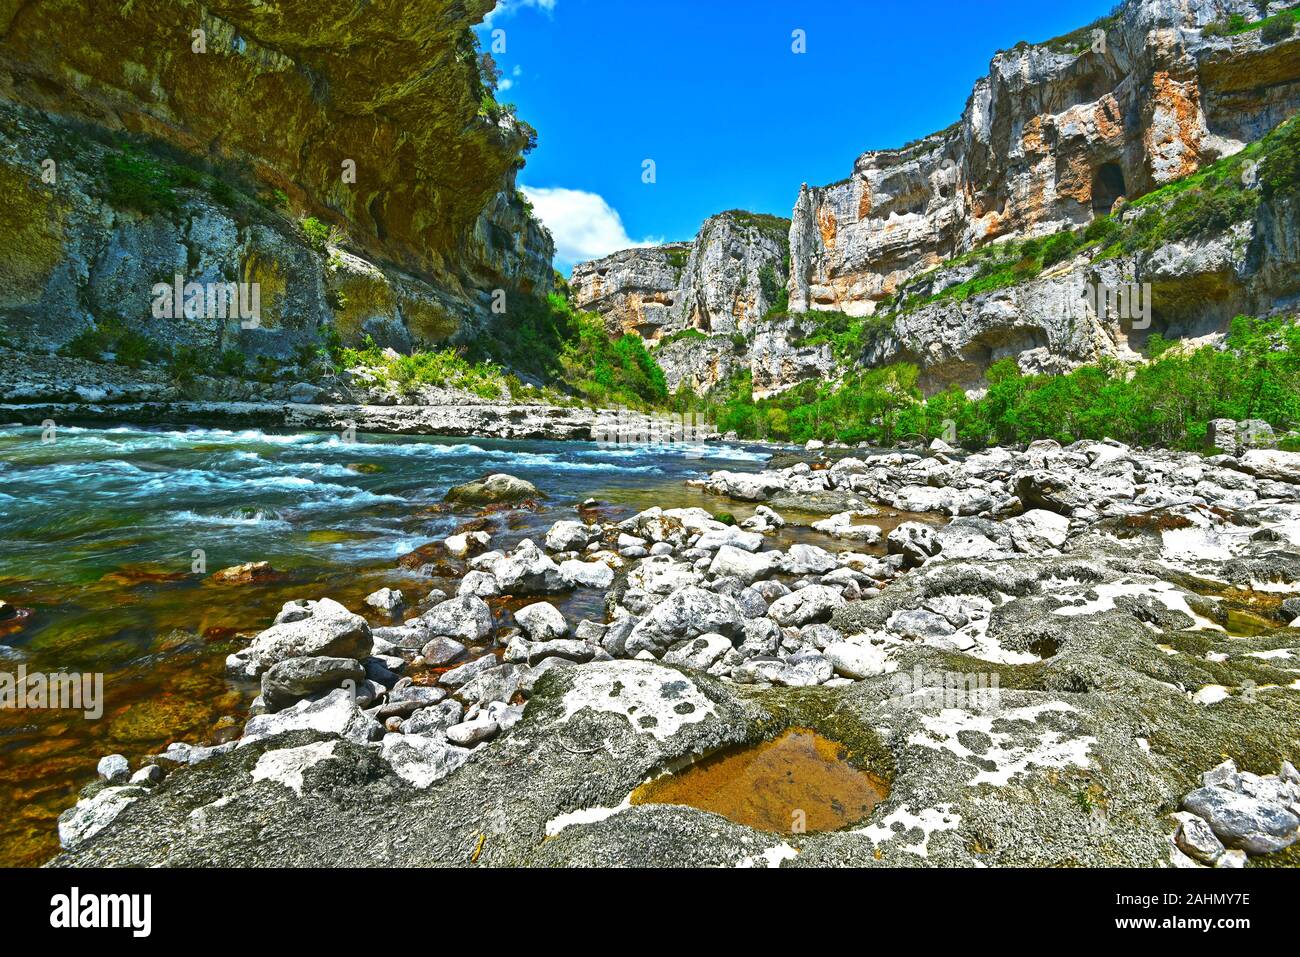 Panoramic view from the flow of Irati River dominated by walls of Lumbier Canyon, which makes a part of Sierra de Leyre mountain chain in Pyrenees of Stock Photo